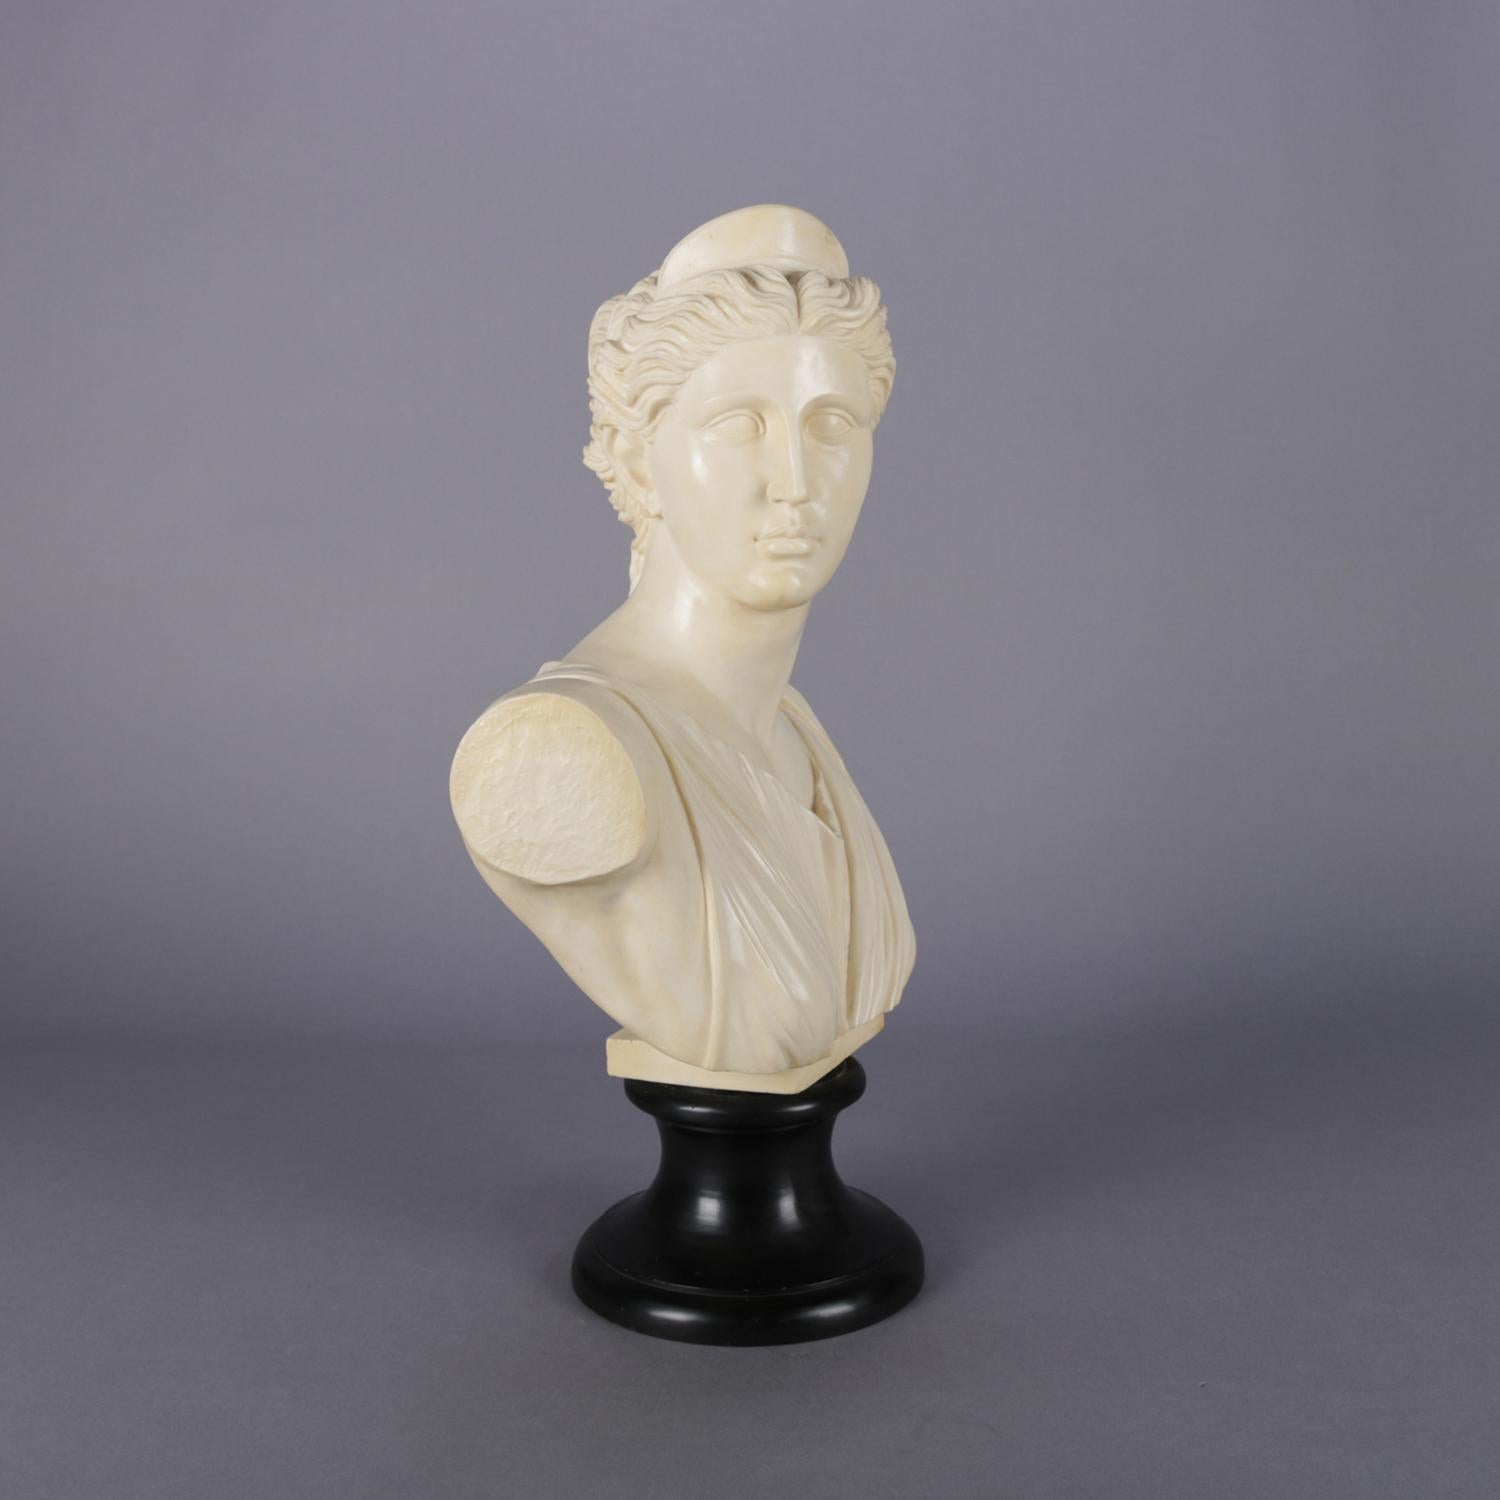 Italian resin portrait sculpture features bust of Artemis with gilt highlights and raised on painted plinth, signed A. Santini, 20th century

Measures: 20